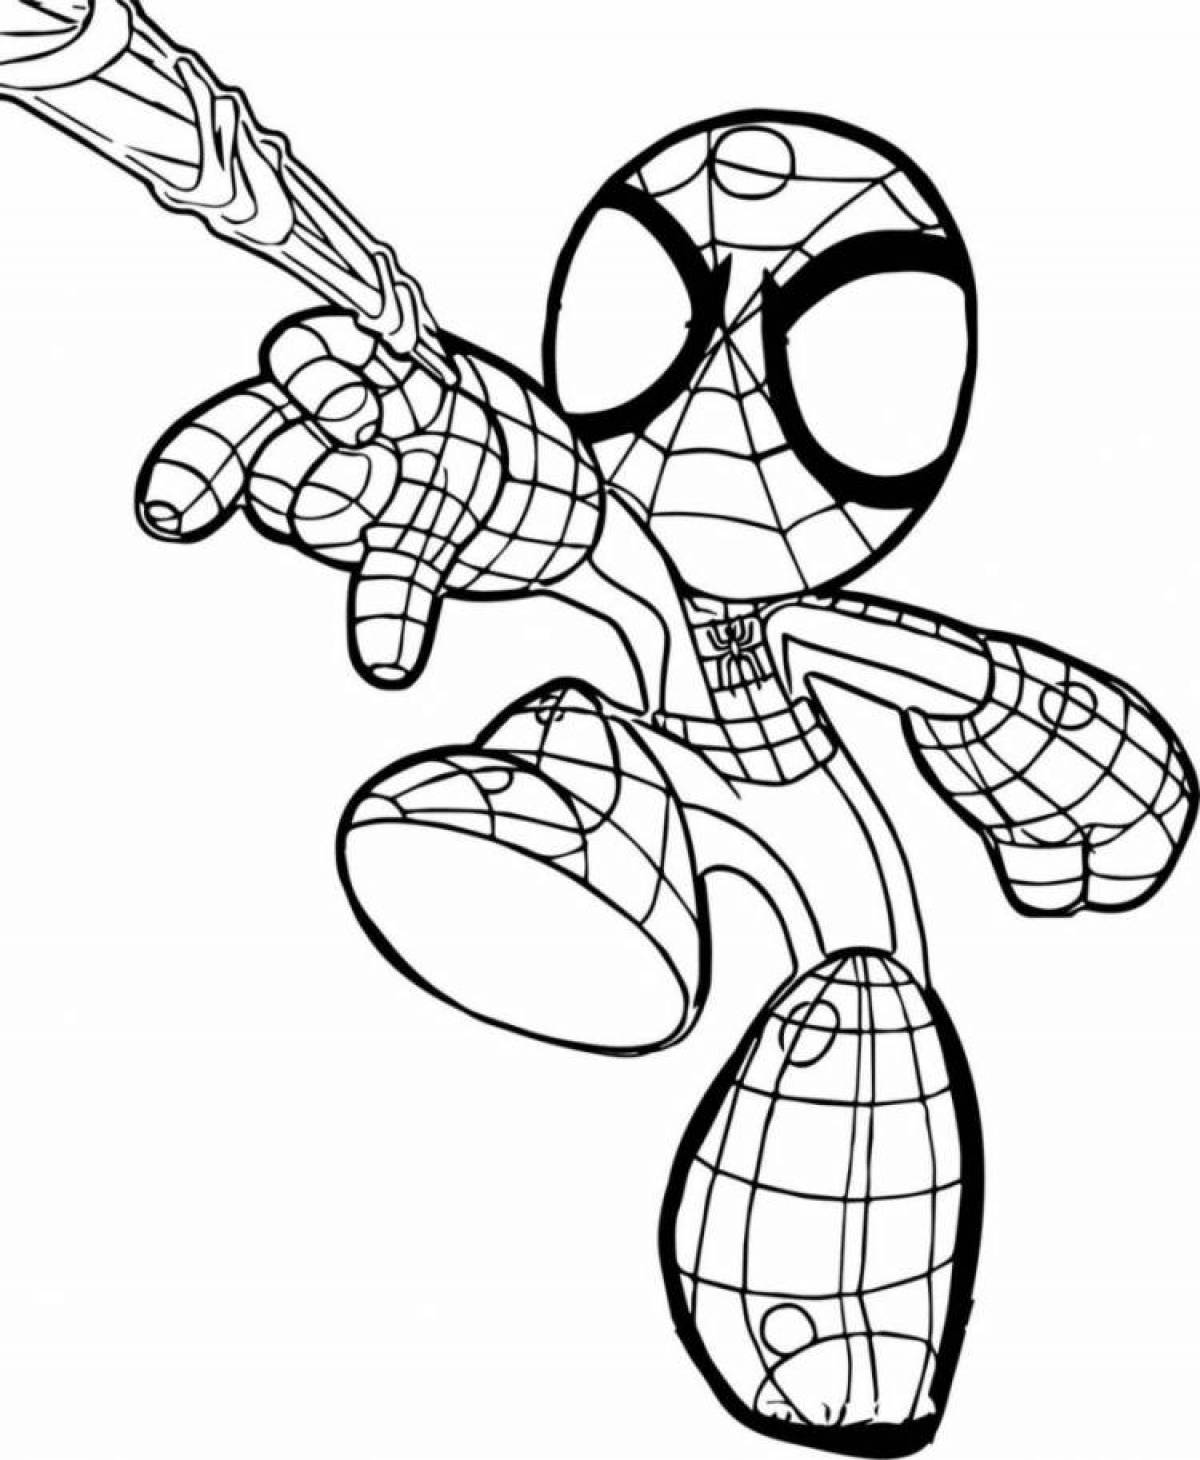 Spiderman's wonderfully detailed coloring page